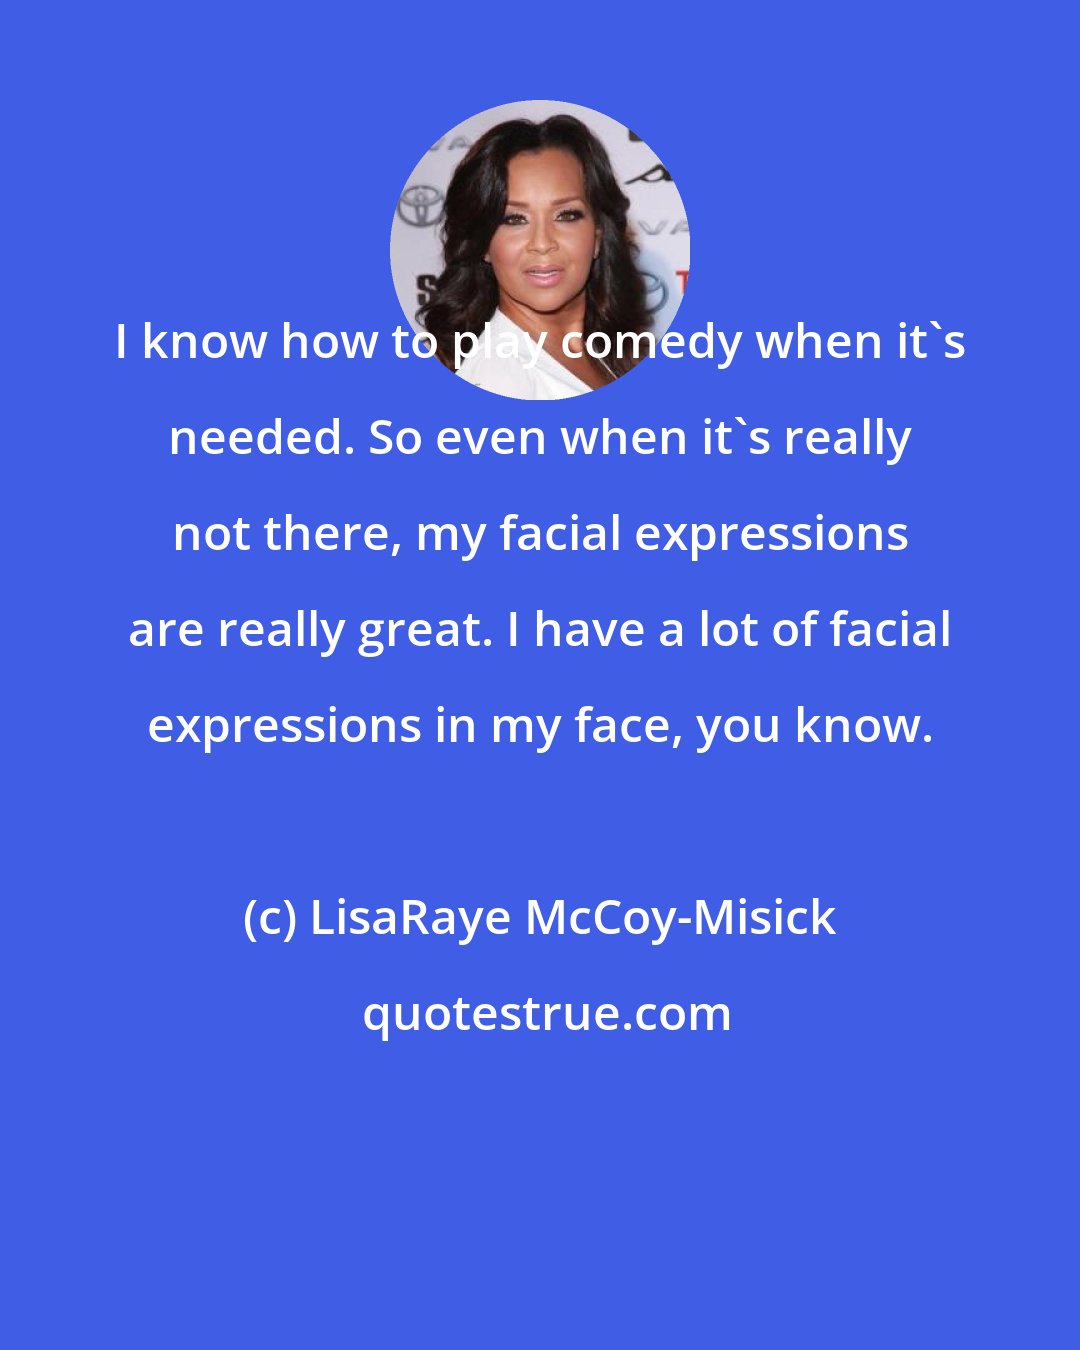 LisaRaye McCoy-Misick: I know how to play comedy when it's needed. So even when it's really not there, my facial expressions are really great. I have a lot of facial expressions in my face, you know.